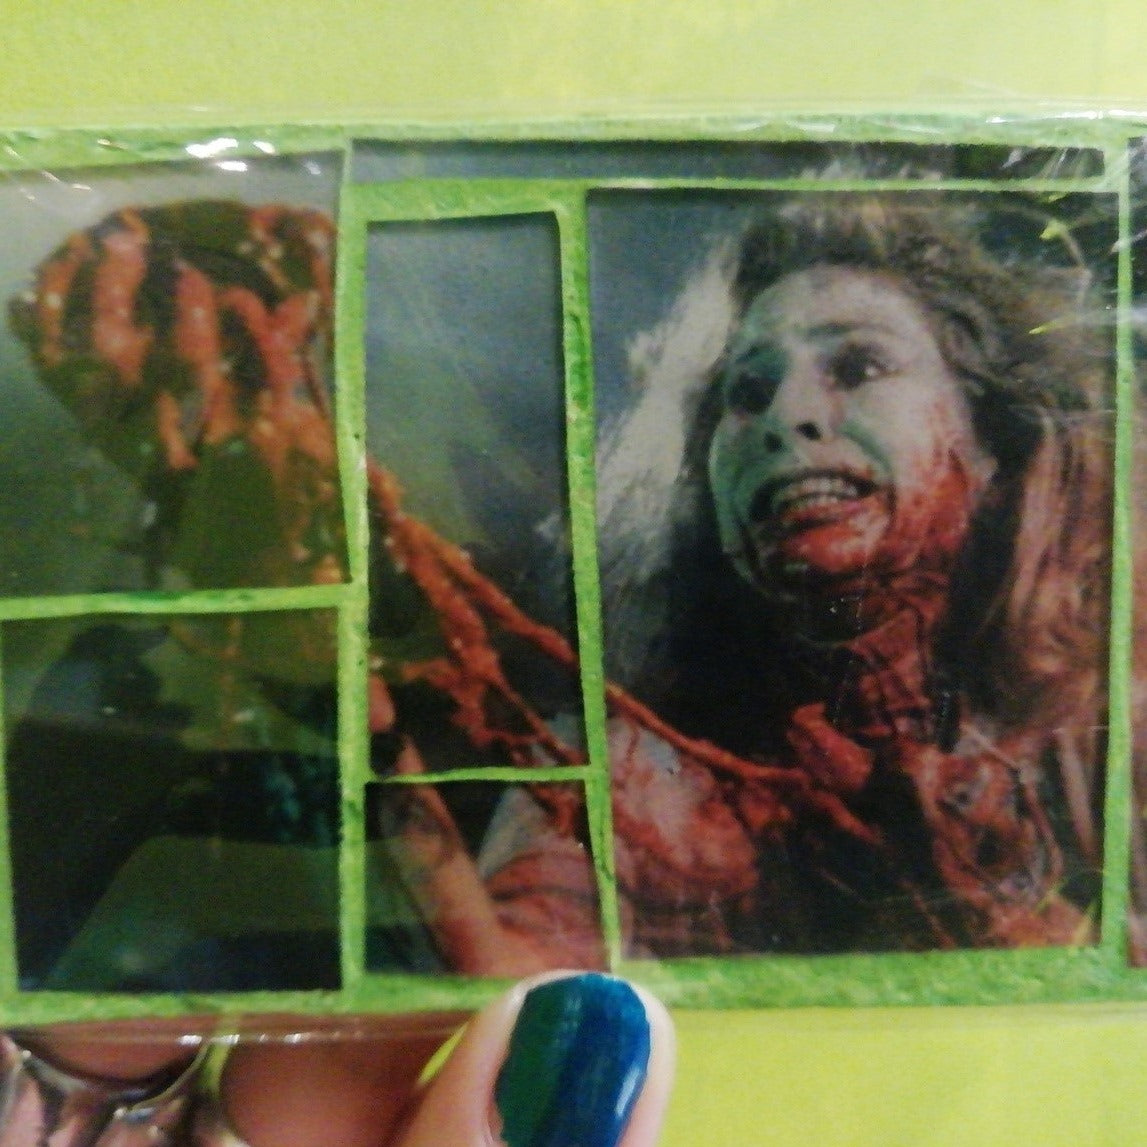 Glass mosaic magnet  " The Bride of Re-Animator "